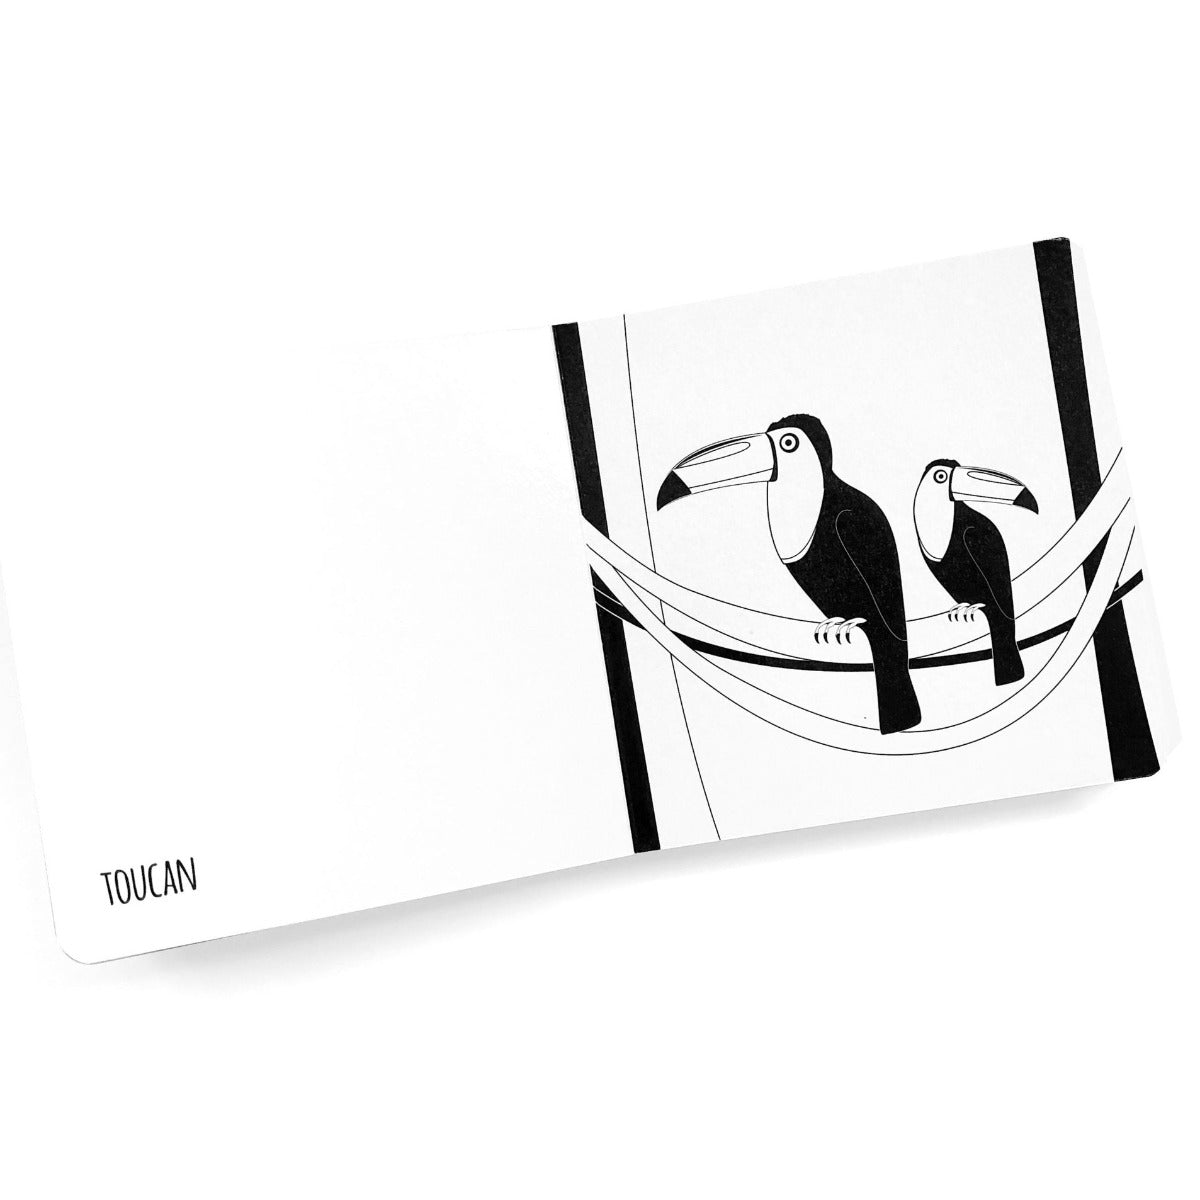 Black and white book for babies showing a drawing of toucans with the word on the opposite page.